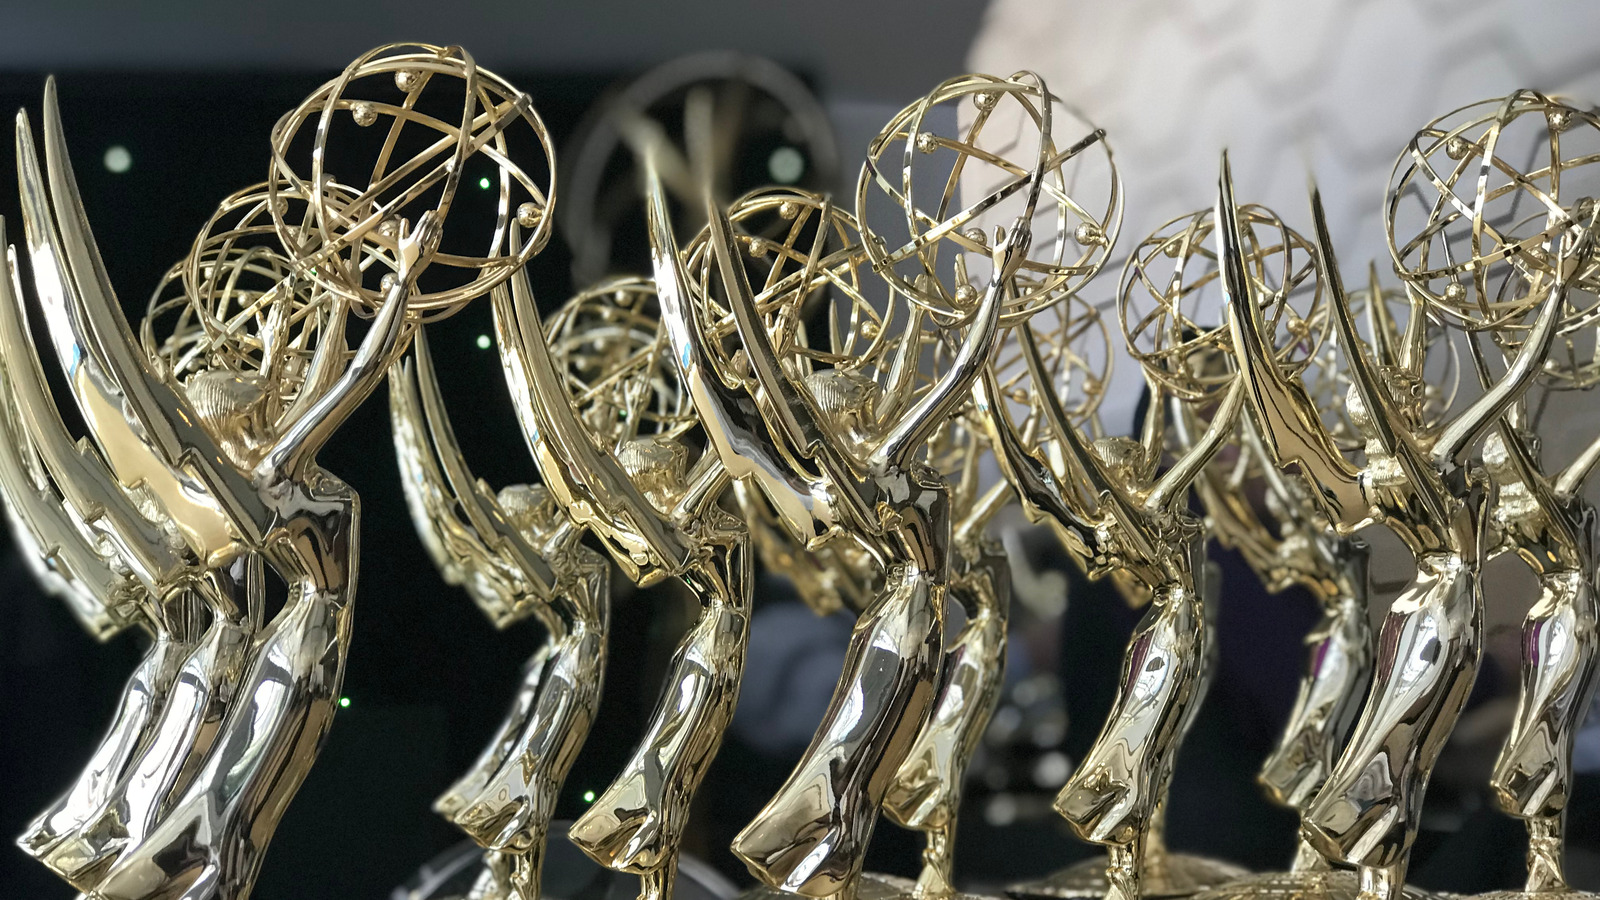 Why The 2021 Emmys Was More Like A Party Than An Awards Show - Exclusive